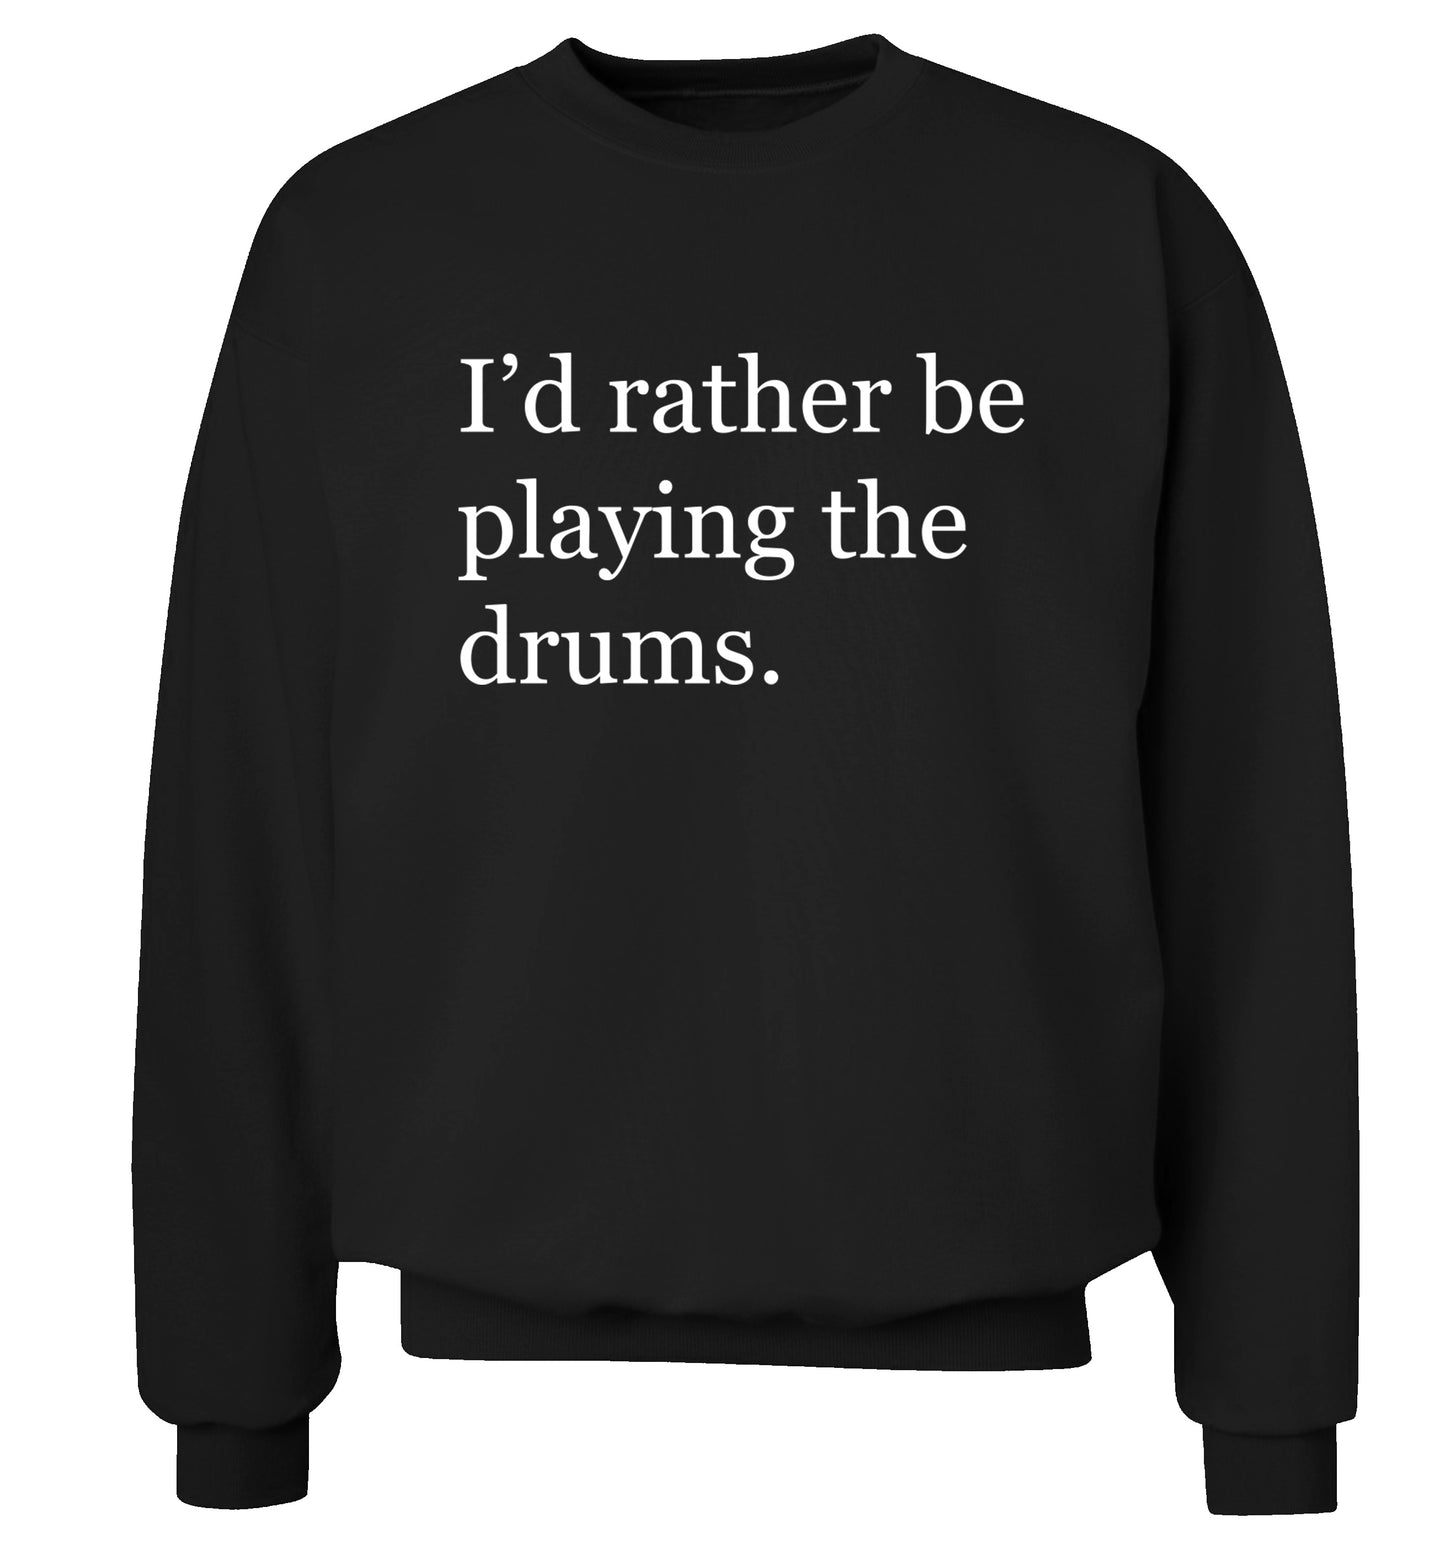 I'd rather be playing the drums Adult's unisexblack Sweater 2XL